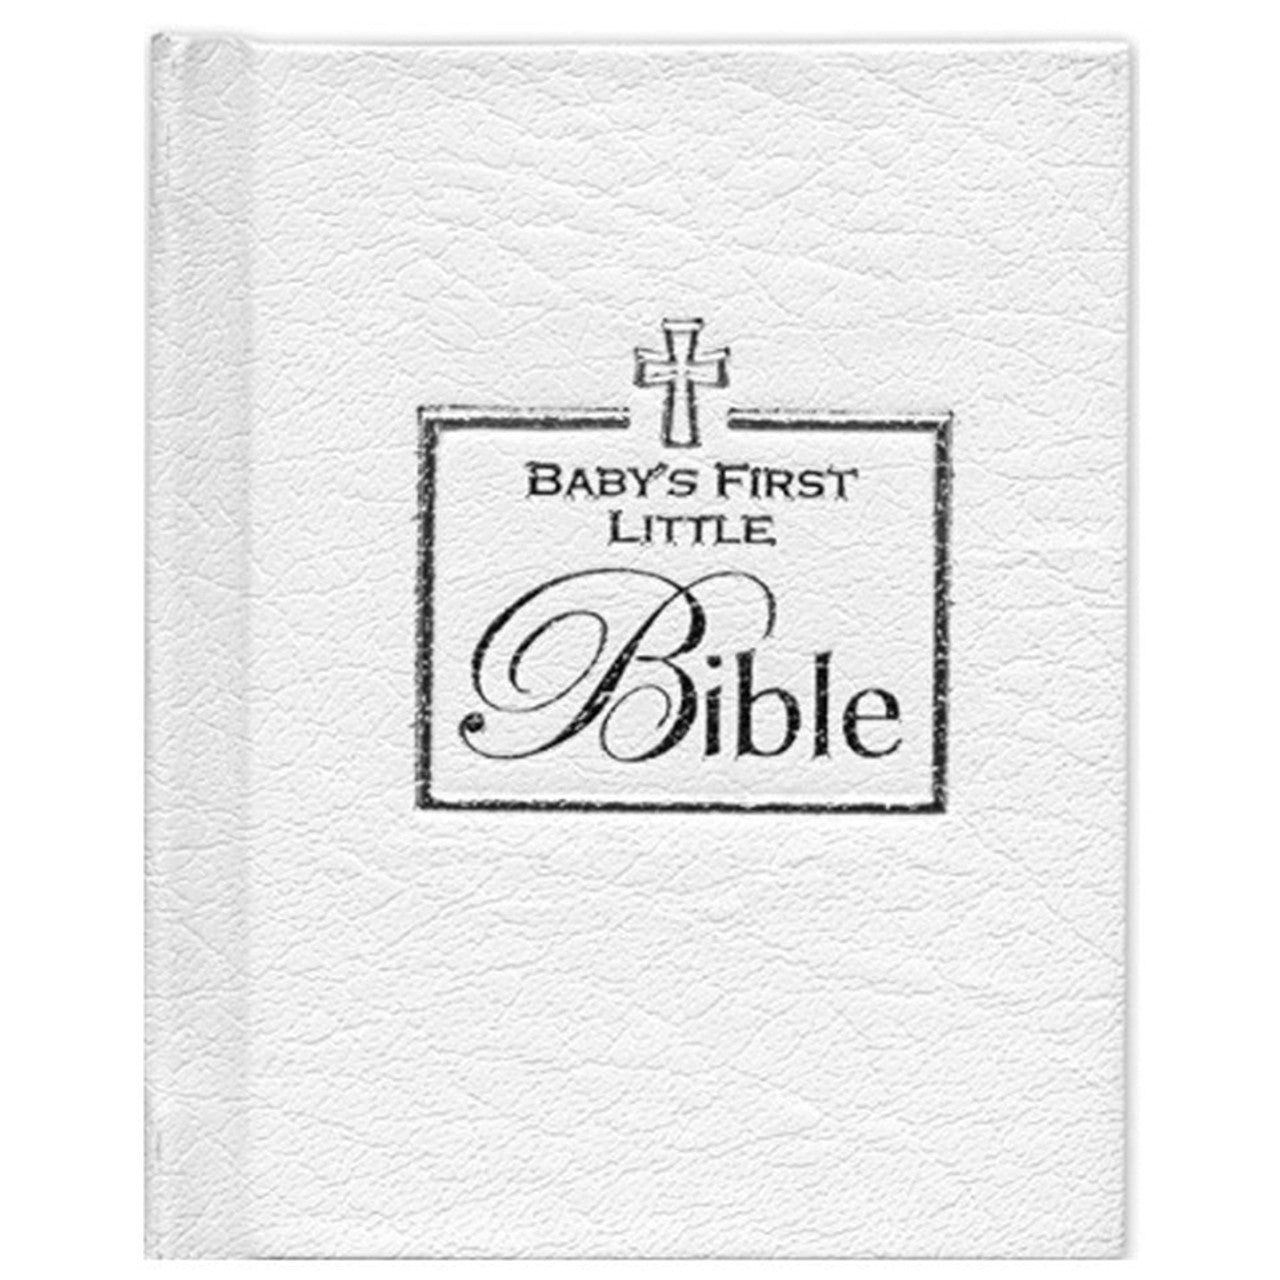 Baby's First Little Bible (White)-Shannon Road Gifts-Little Giant Kidz